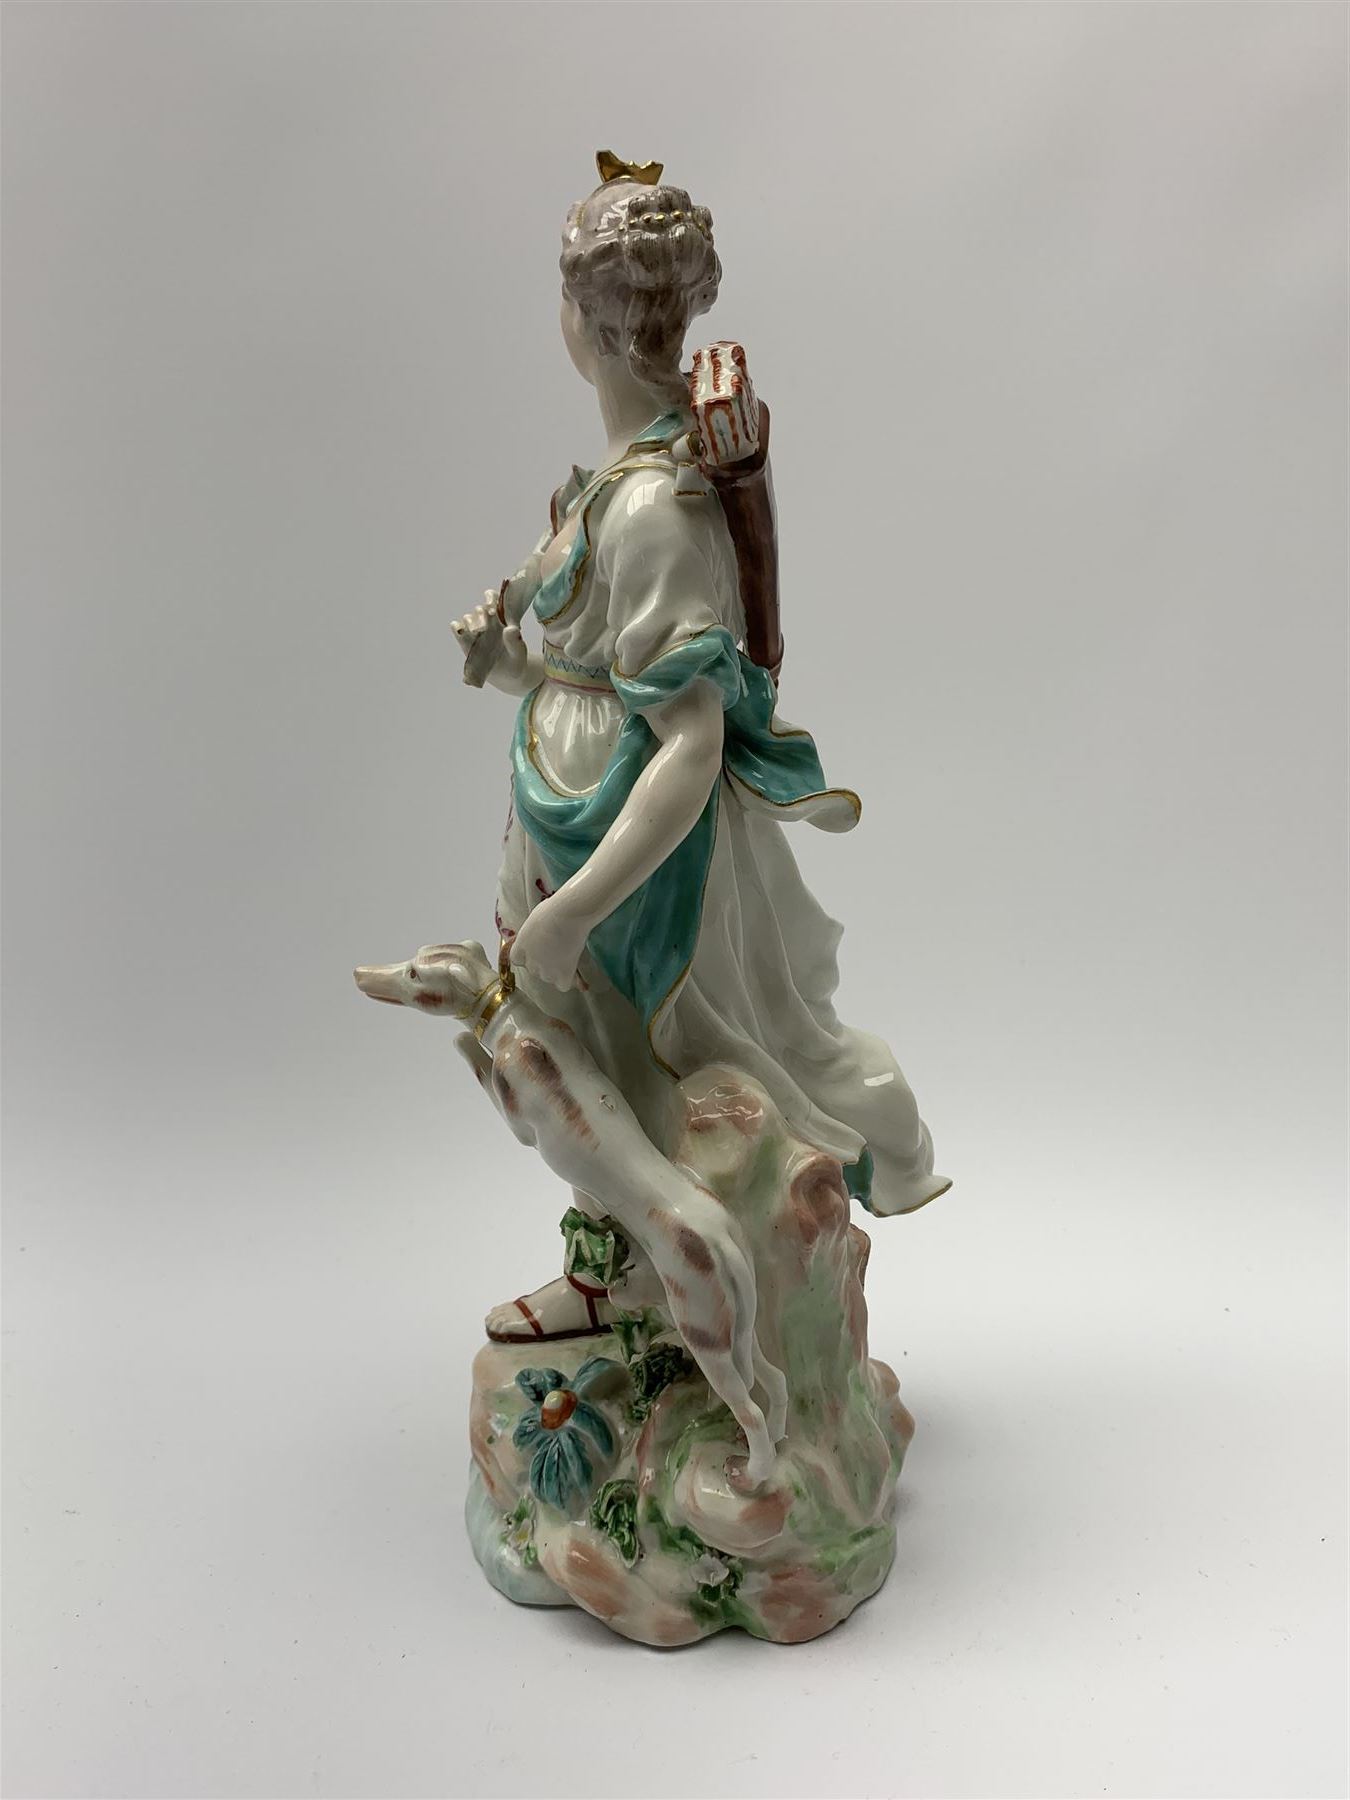 Mid 18th century Derby porcelain figure modelled as Dianna the Huntress - Image 4 of 9